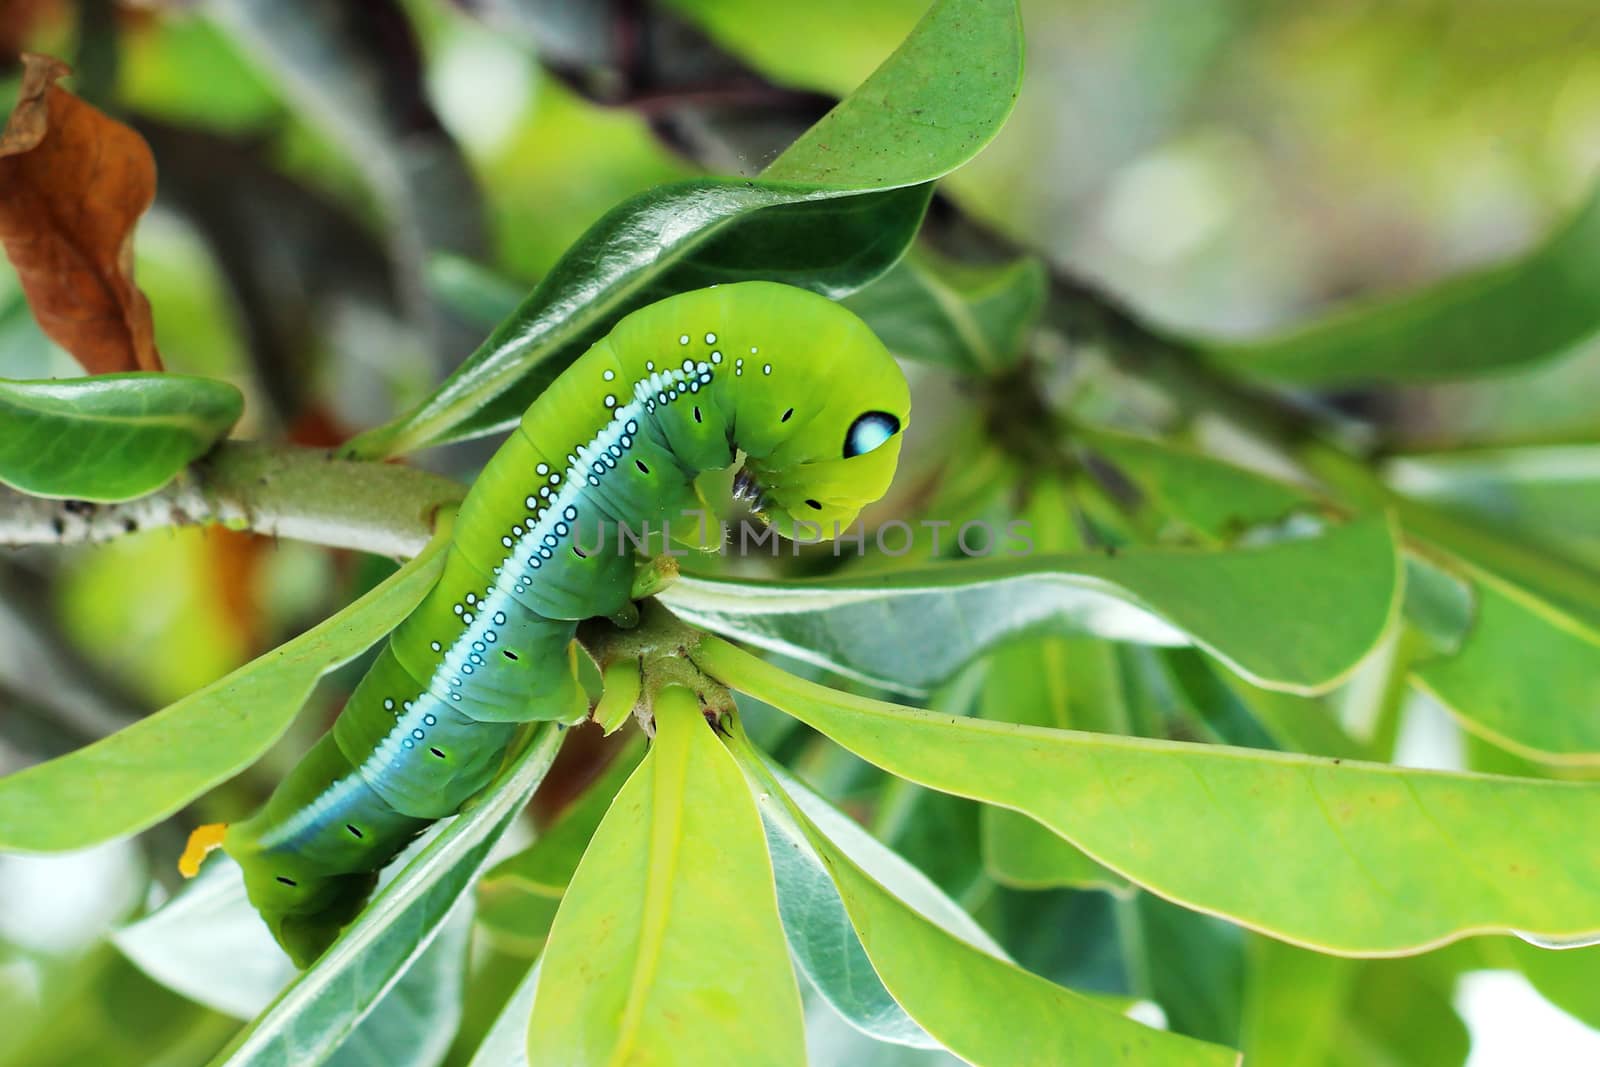 Image of green caterpillar on green leaf